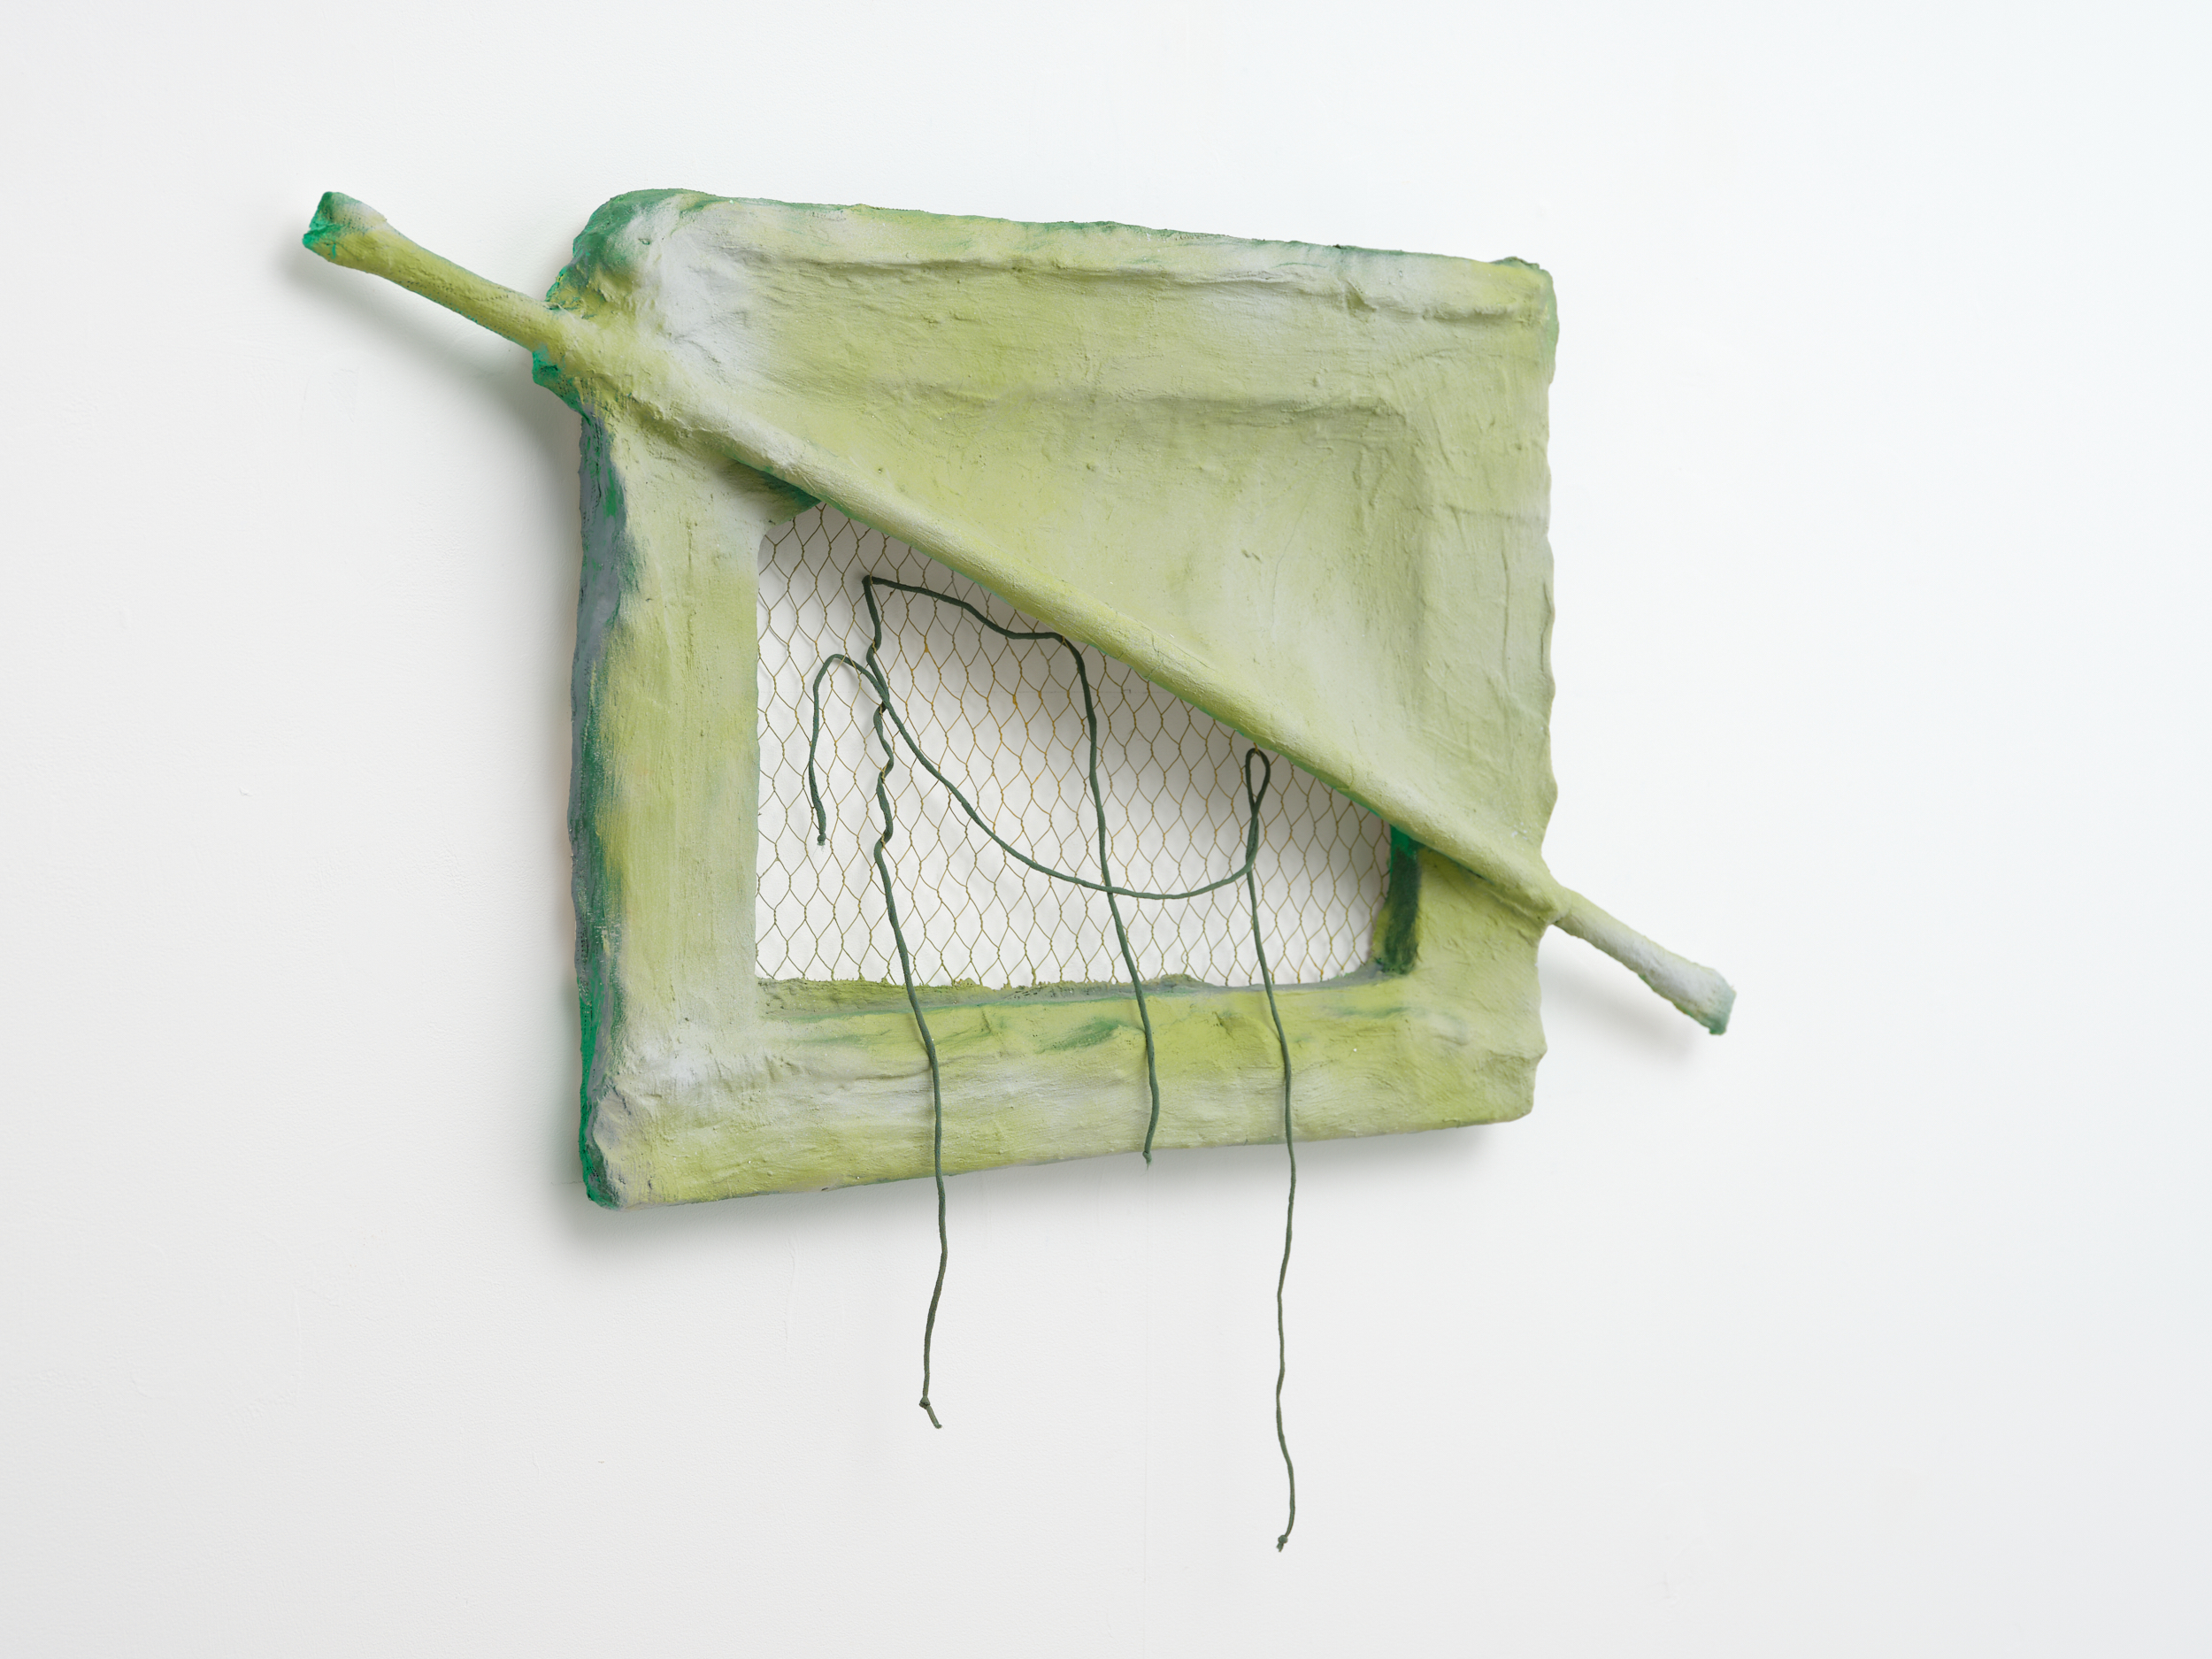 Sculptural painting by Rachel Walters in Plaster bandage, chicken wire, plumbers pipe, oil, acrylic and silk thread on stretcher titled Another Human